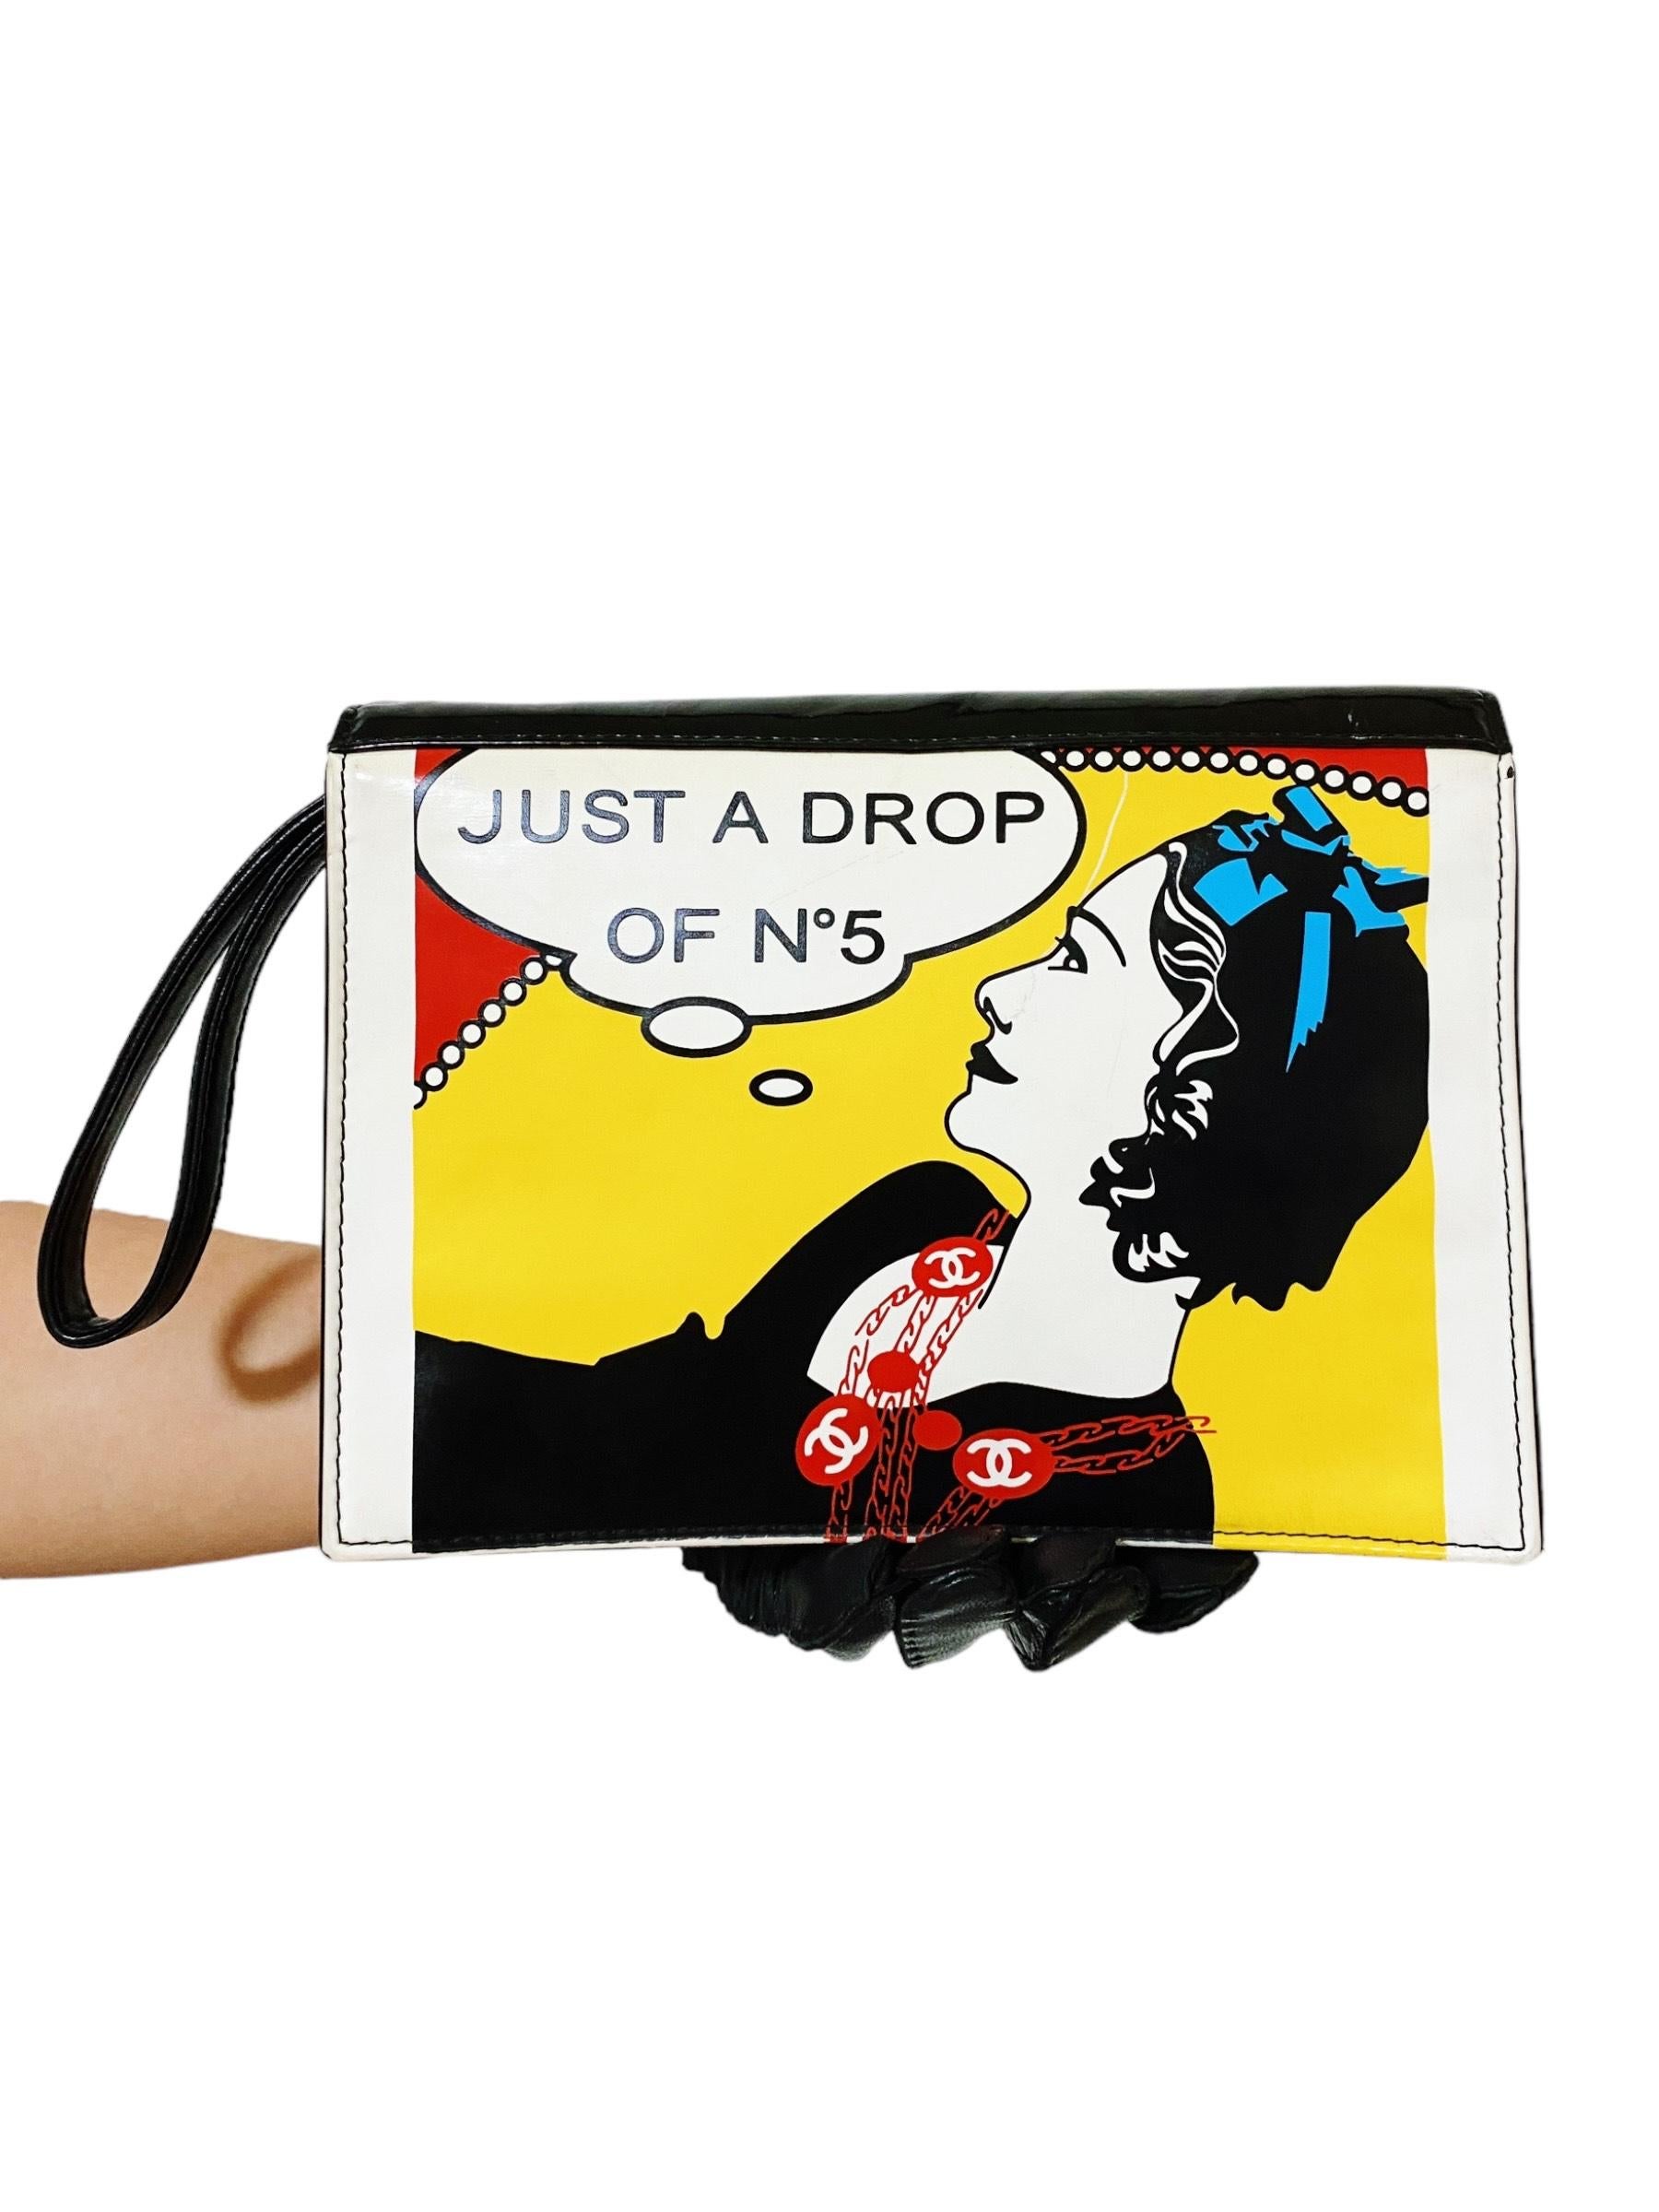 Iconic and extremely hard-to-find Chanel Mademoiselle Comic Clutch. One of the rarest vintage CHANEL purses that features CHANEL Mademoiselle portrait print saying 